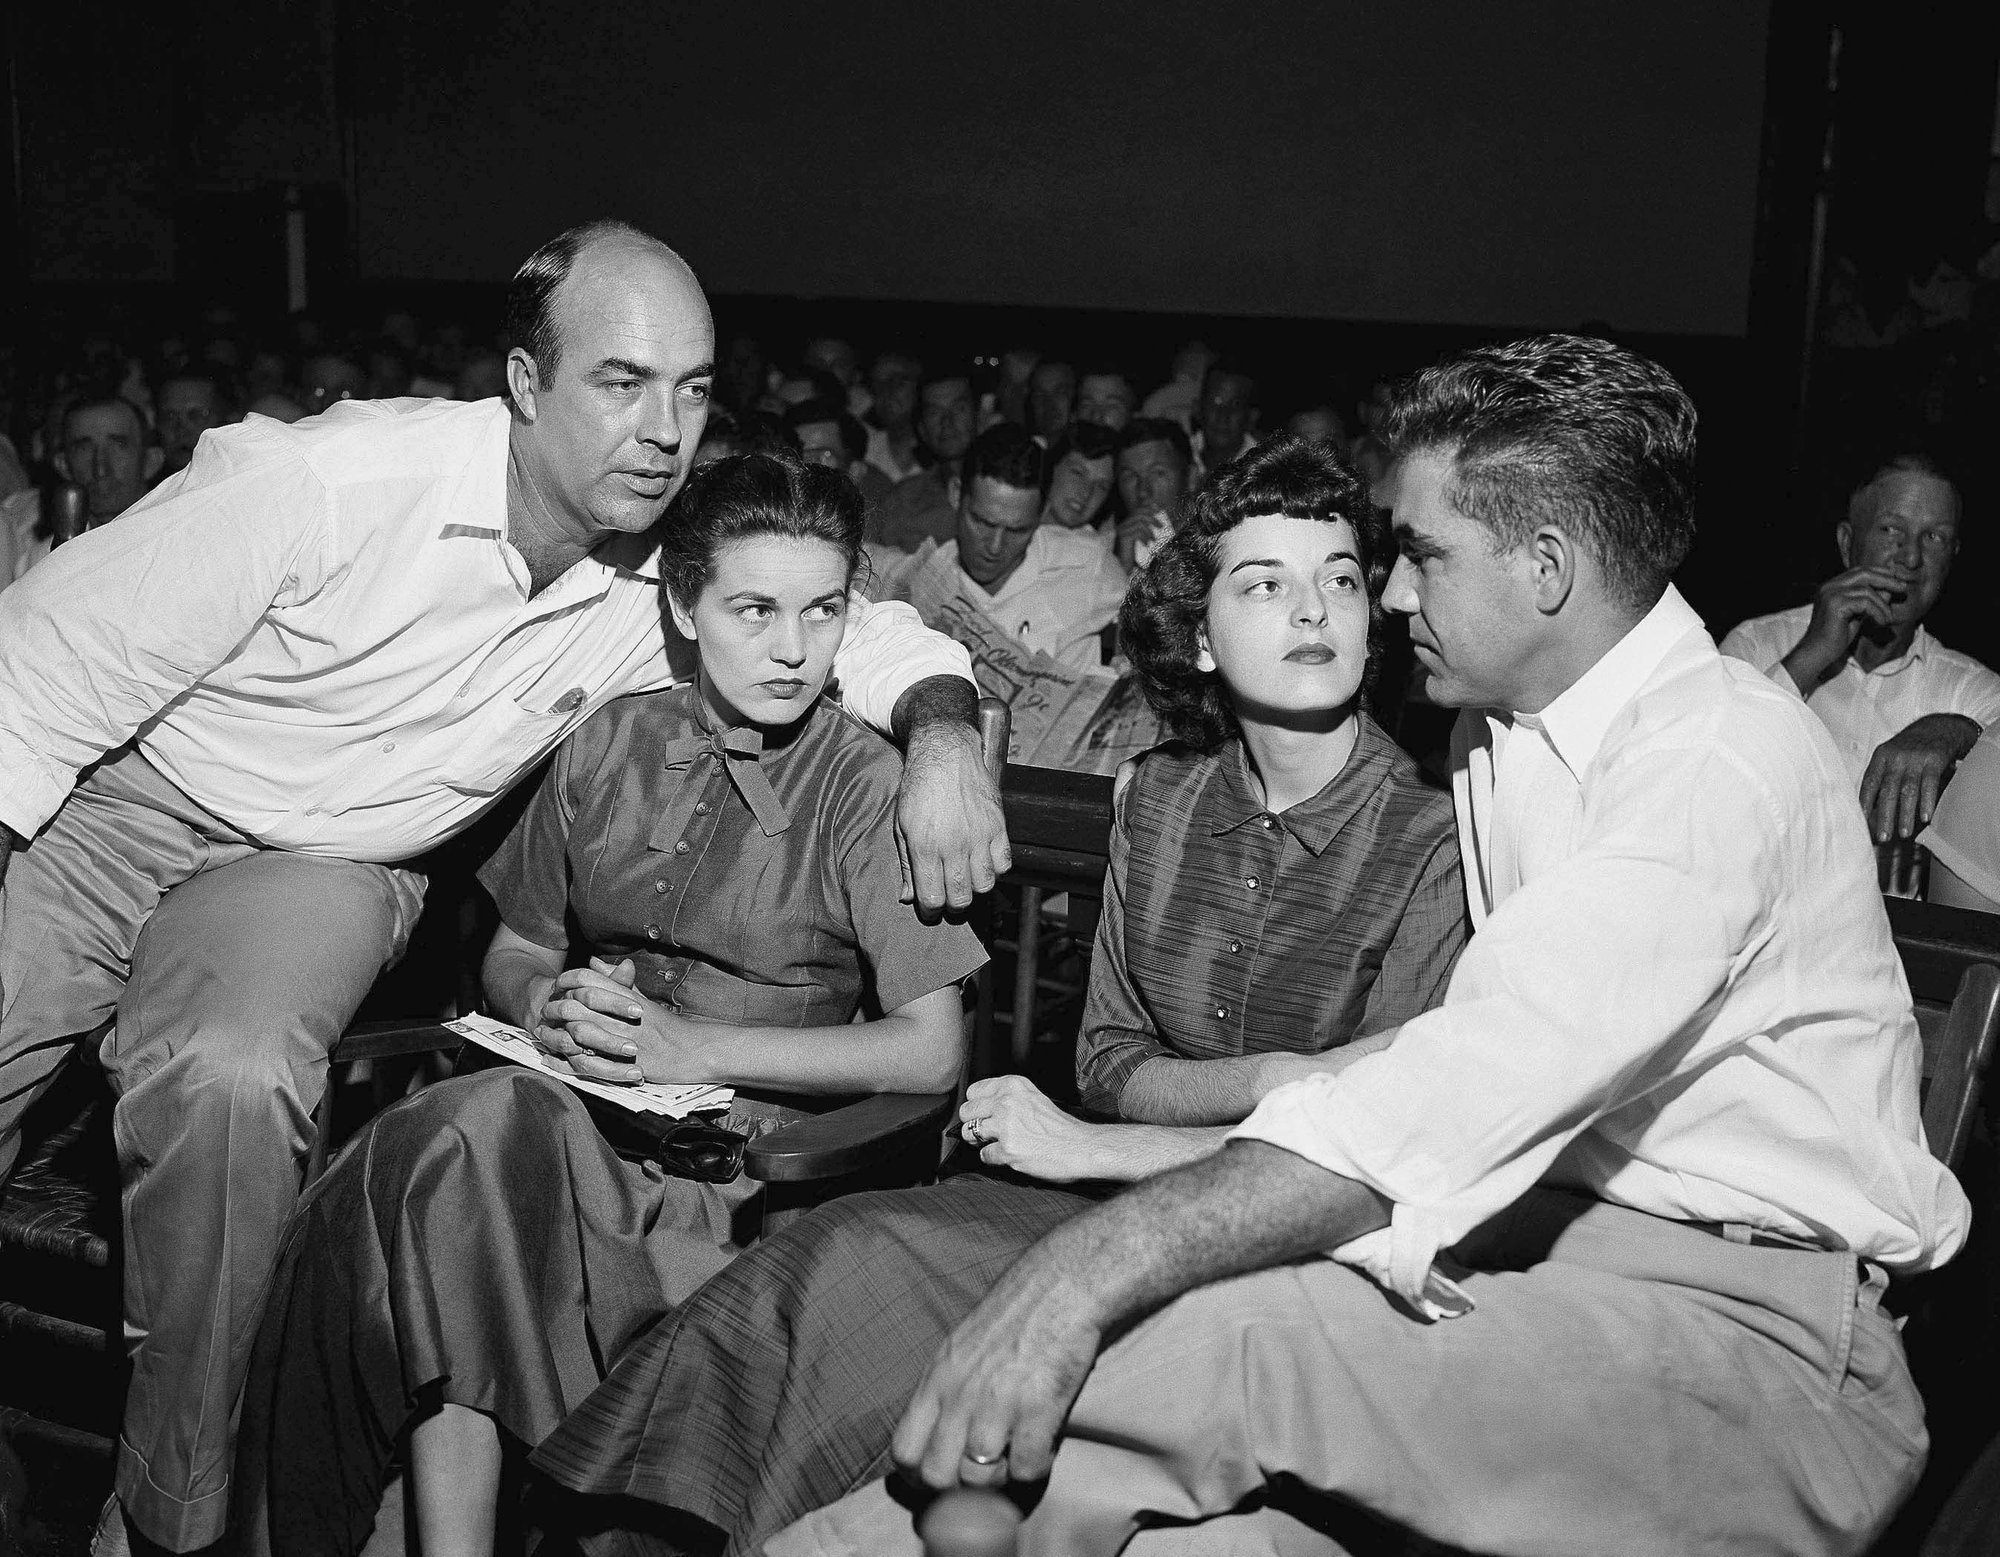 Official: Renewed Emmett Till probe prompted by 2017 book | AP News